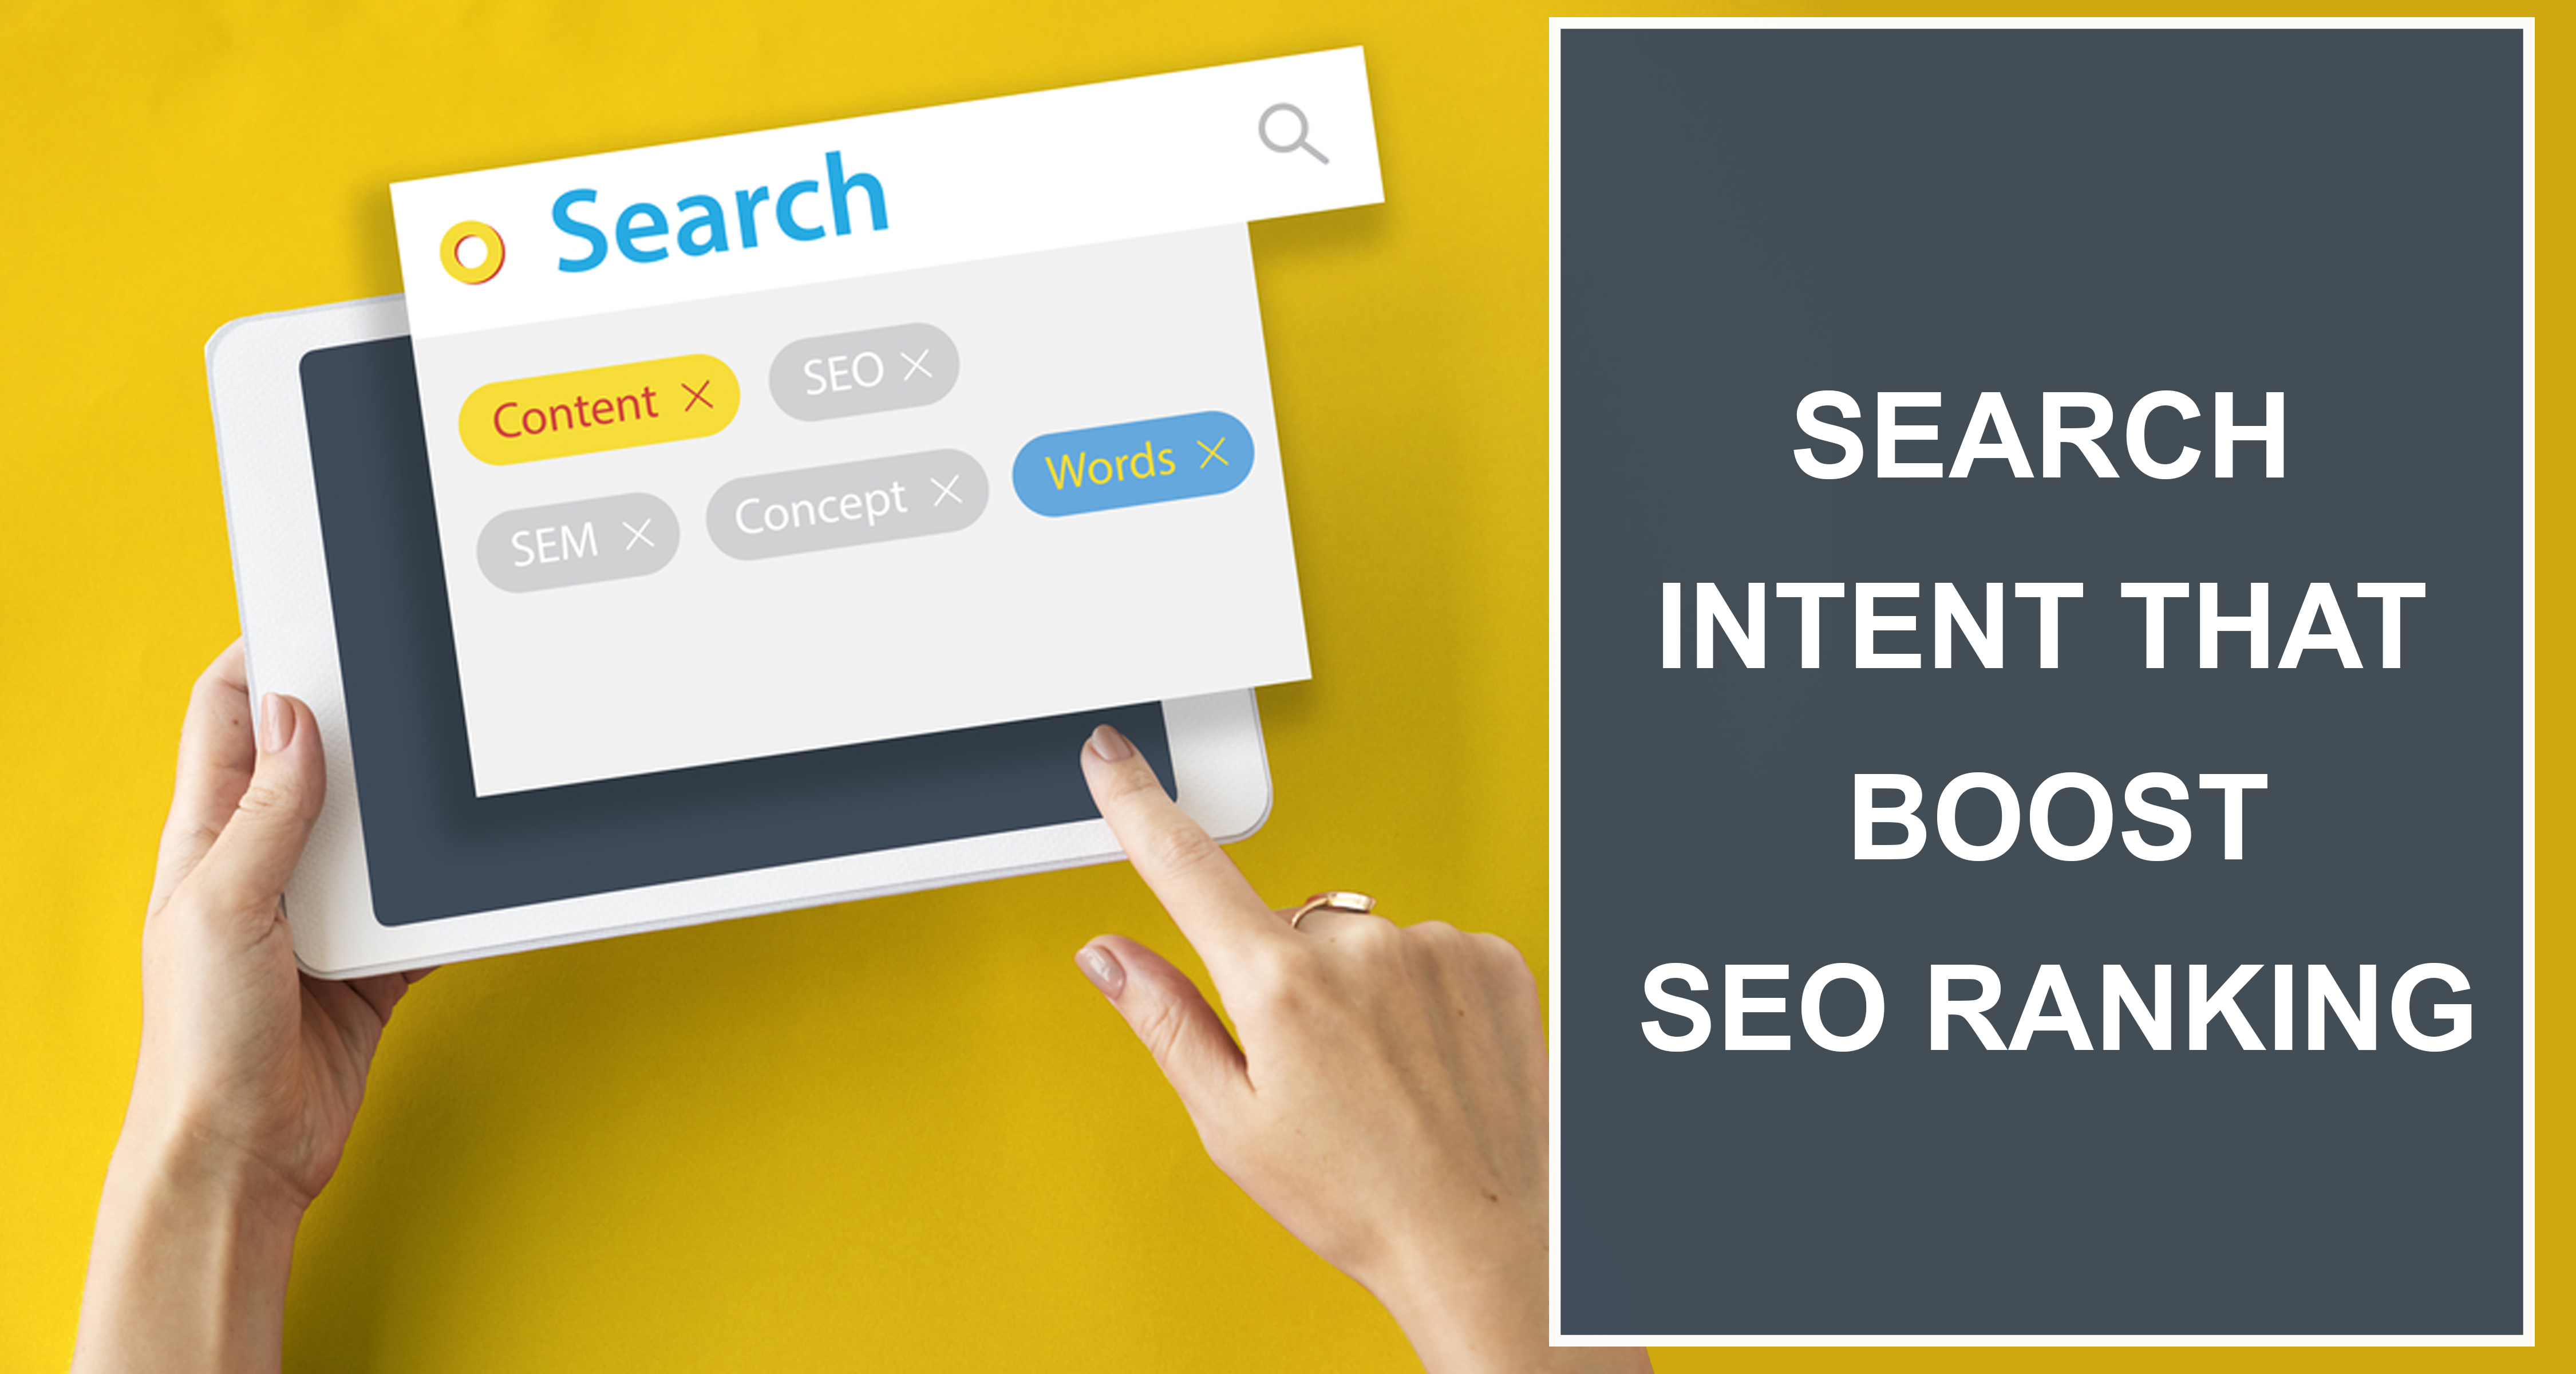 Best methods to identify search intent that boost SEO ranking